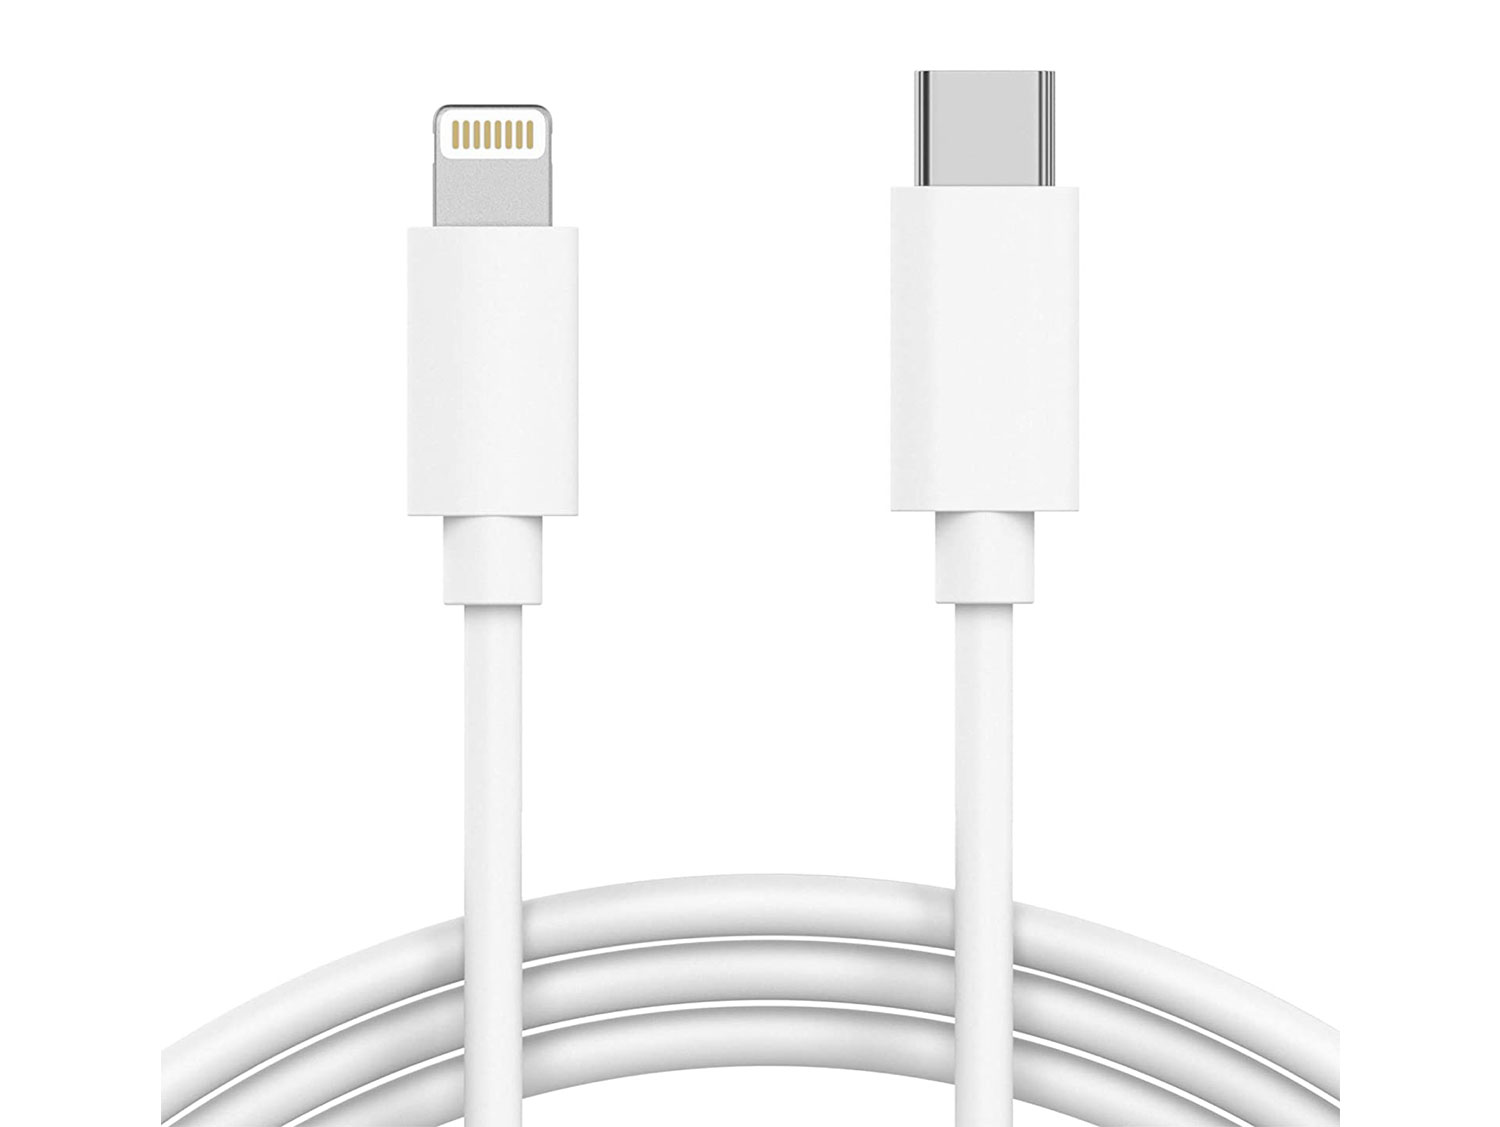 Apple USB-C Lightning Charging 01 Meter Cable